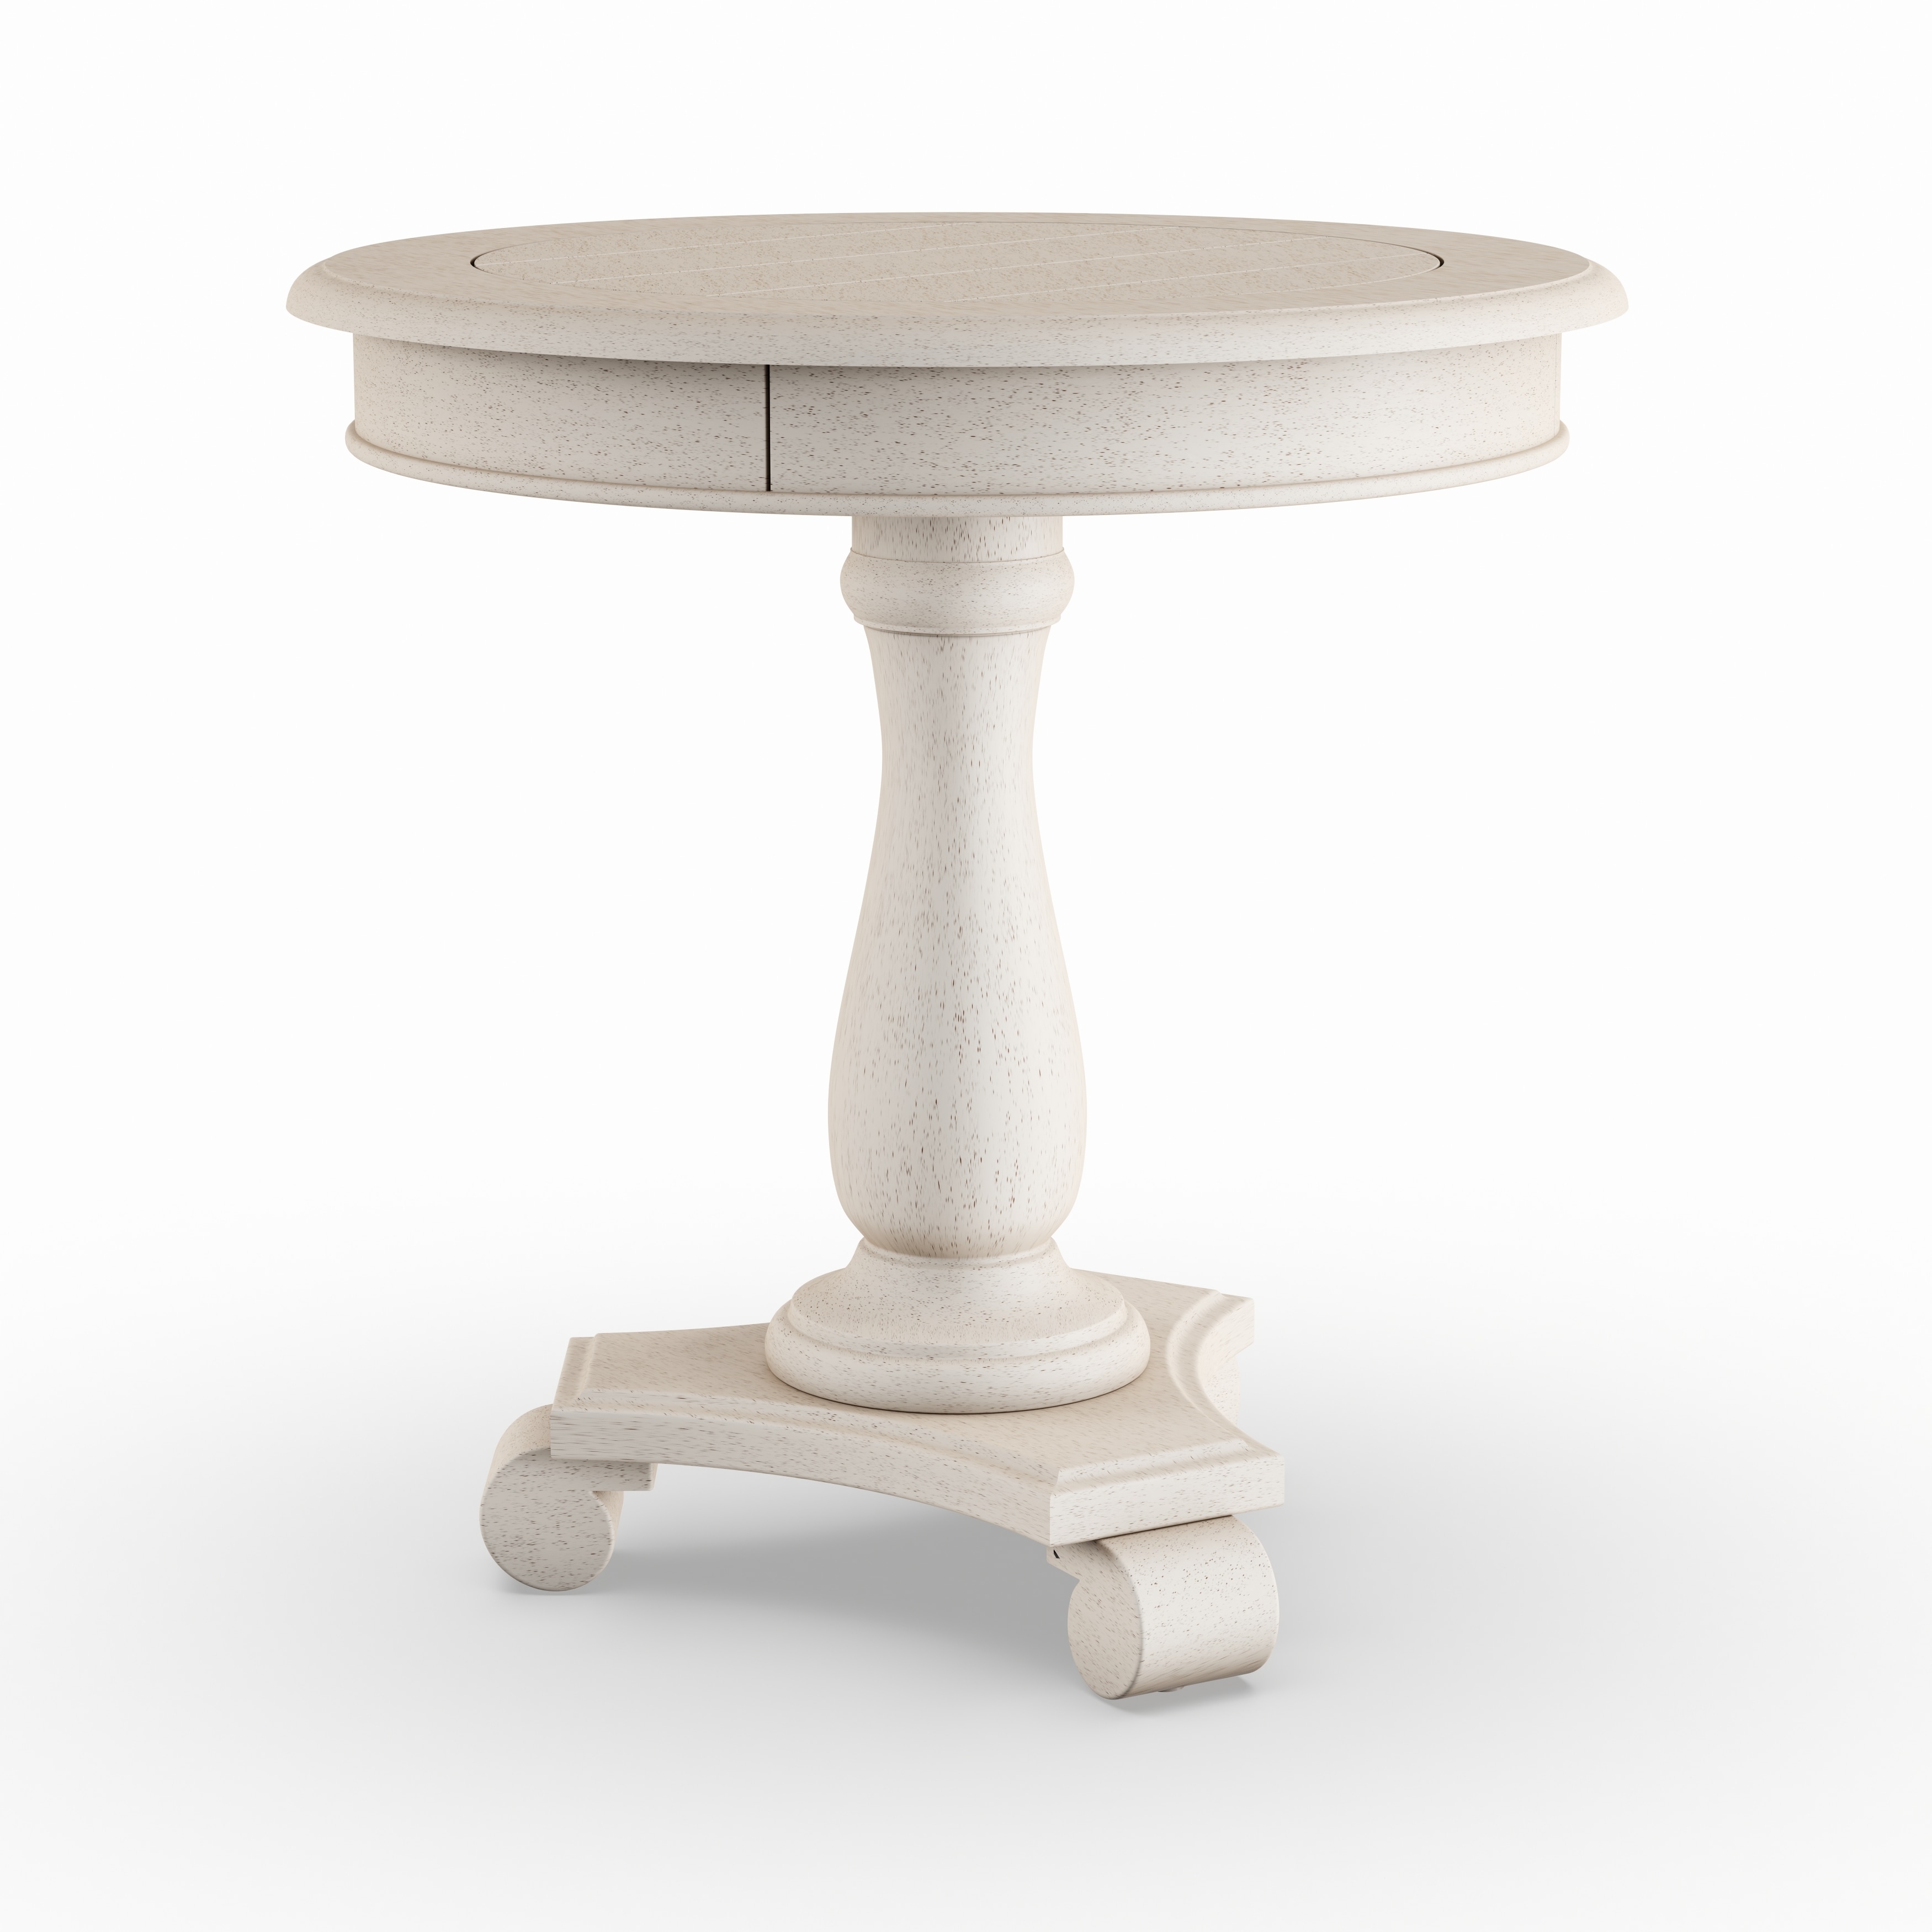 copper grove sonian pedestal base round side table maison rouge boileau cardboard accent free shipping today white plastic outdoor nesting dining gold bedside console berg